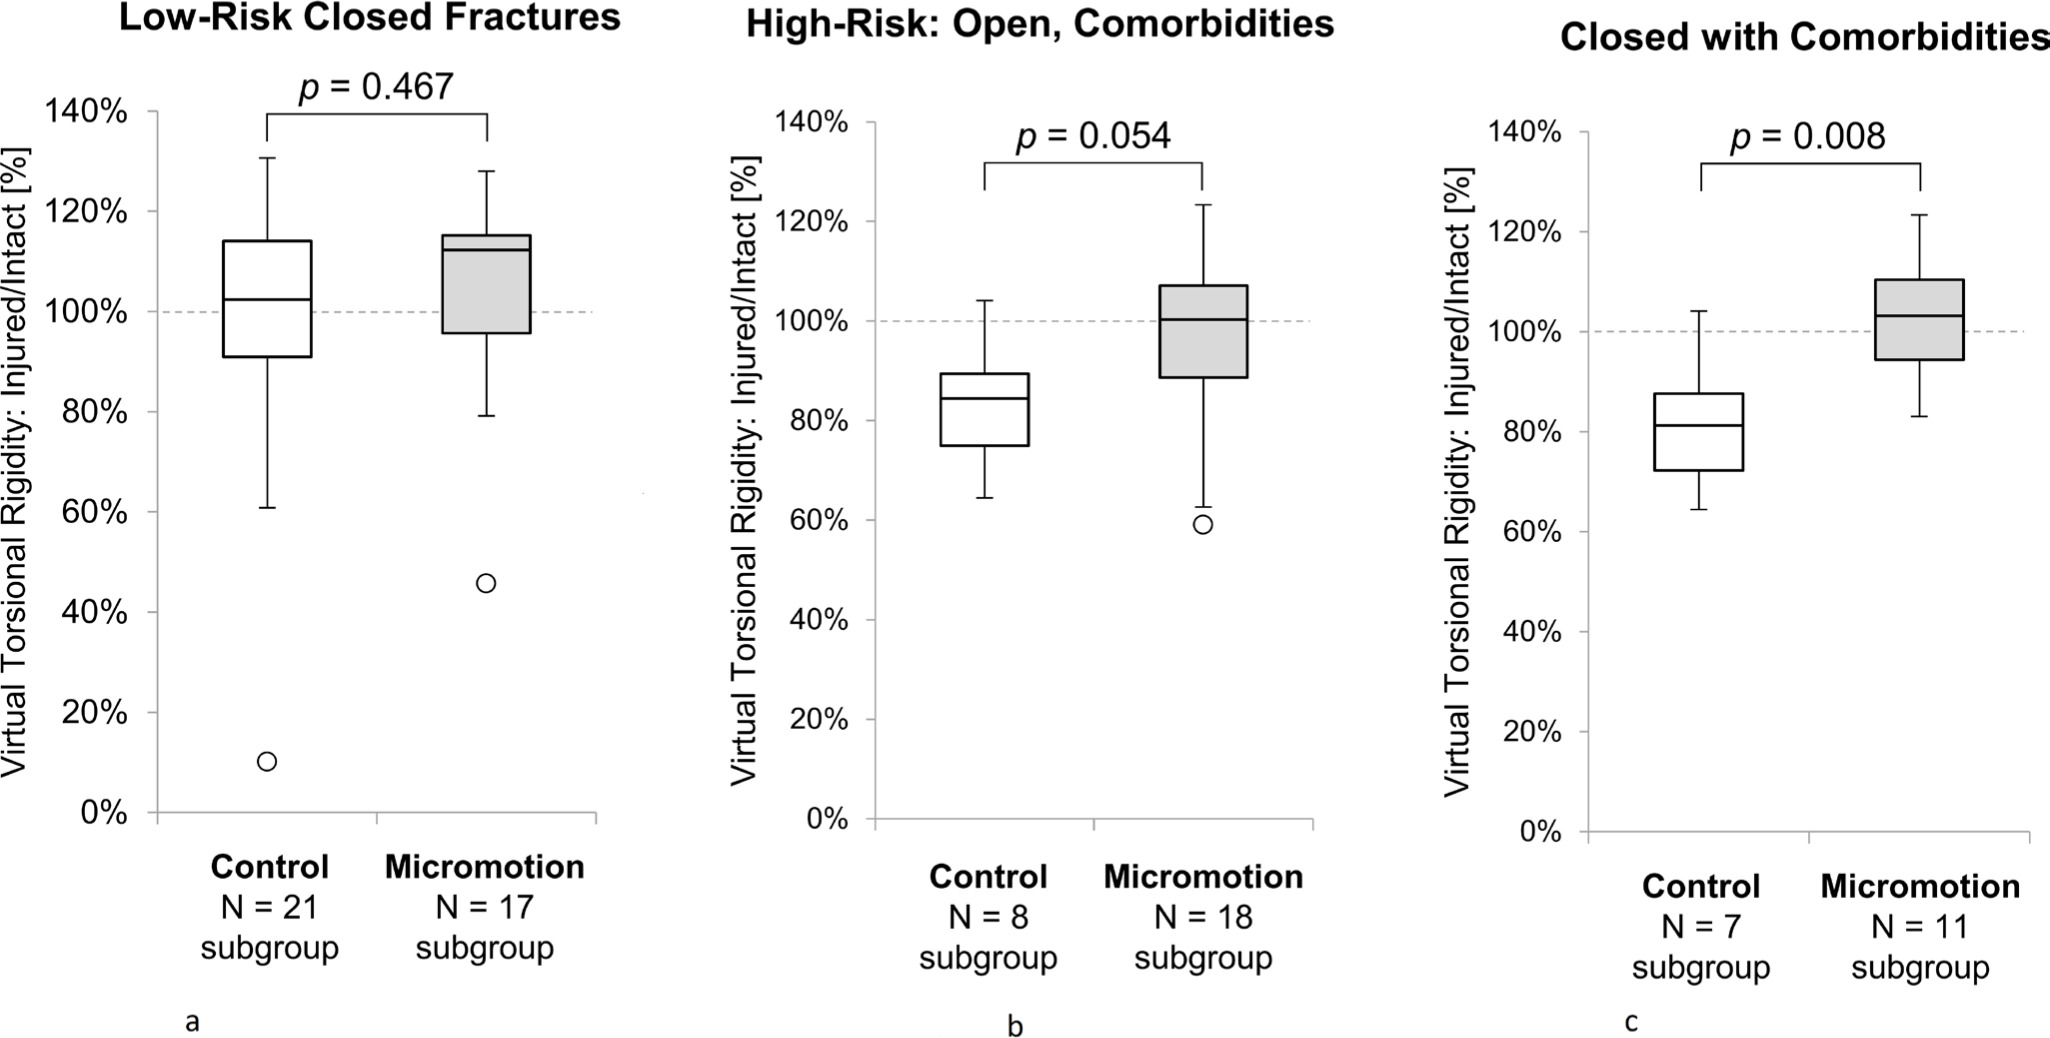 Fig. 6 
          Virtual torsion test results for patients in three subgroups: a) low-risk injuries (closed and Gustilo I) in patients with no comorbidities, b) high-risk injuries (Gustilo II and above) and all patients with comorbidities regardless of injury severity, and c) low-risk (closed and Gustilo I) injuries in patients with comorbidities.
        